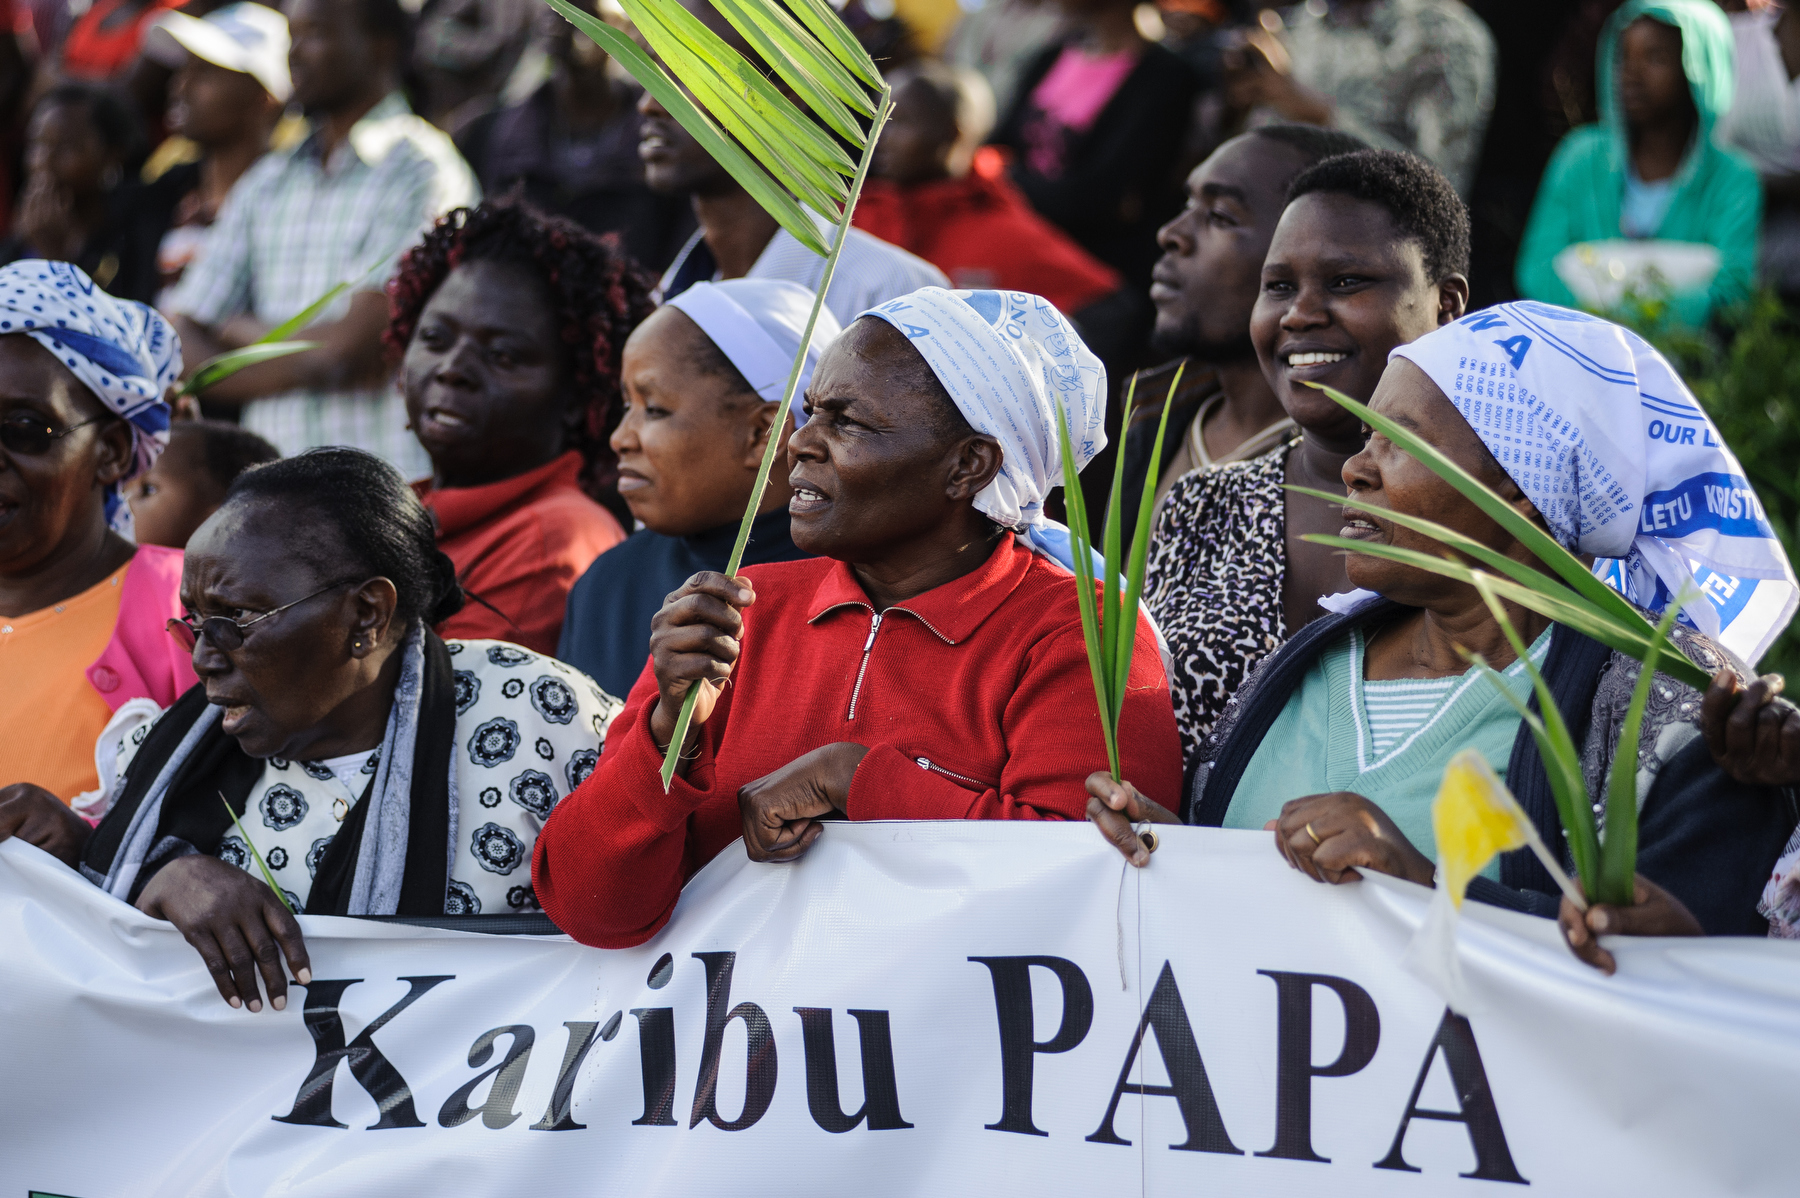  People wait along Mombasa Highway in Nairobi to welcome Pope Francis on November 25, 2015. Pope Francis is on a five-day visit to Kenya, Uganda and Central African Republic (CAR). AFP PHOTO/Jennifer HUXTA
 